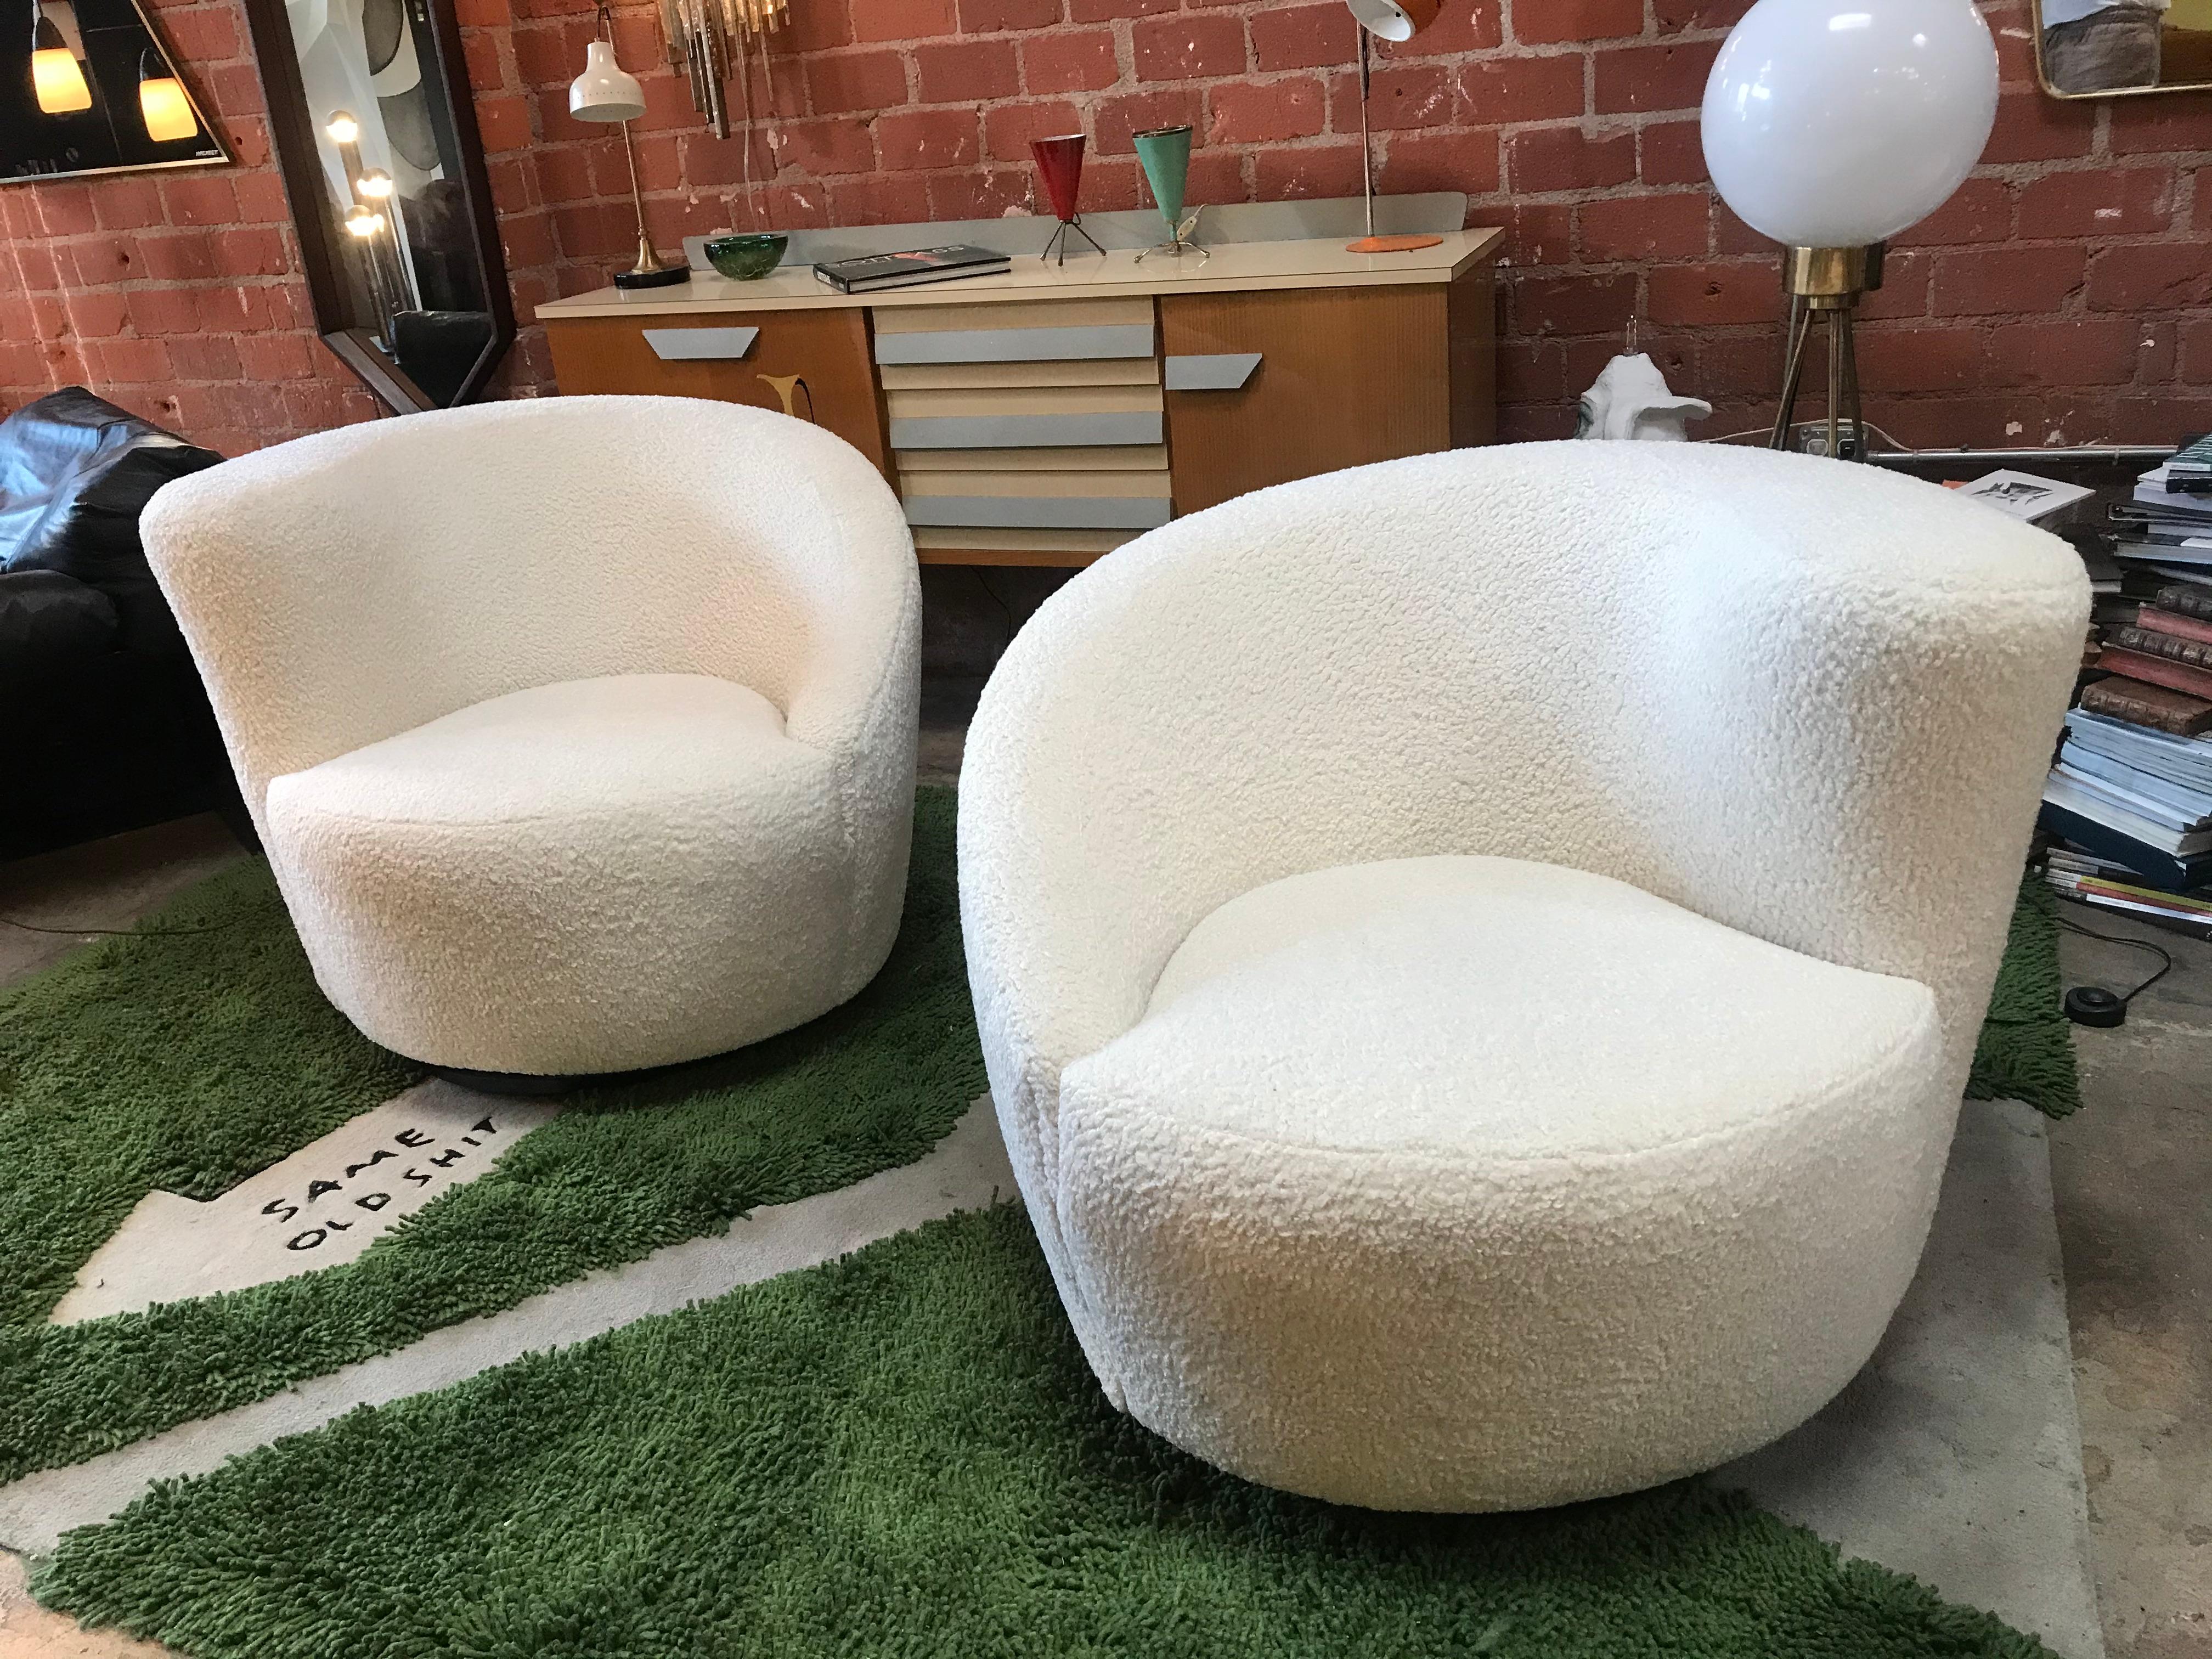 Stunning vintage circa 1960s swivel parlor chairs upholstered in white sheep fabric.

Measure: 21